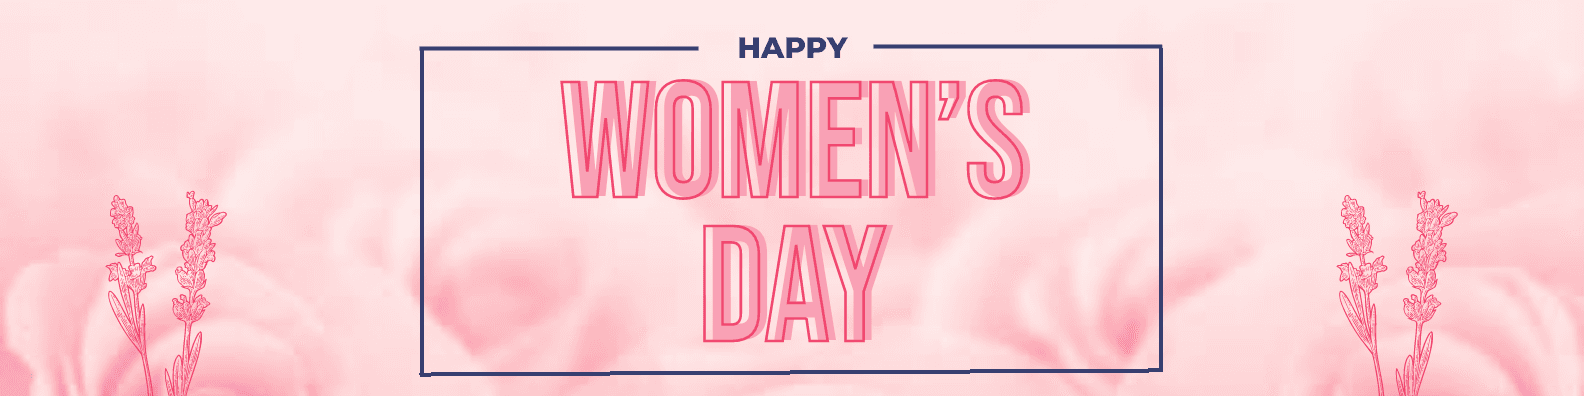 pink-happy-womens-day-linkedin-banner-template-thumbnail-img